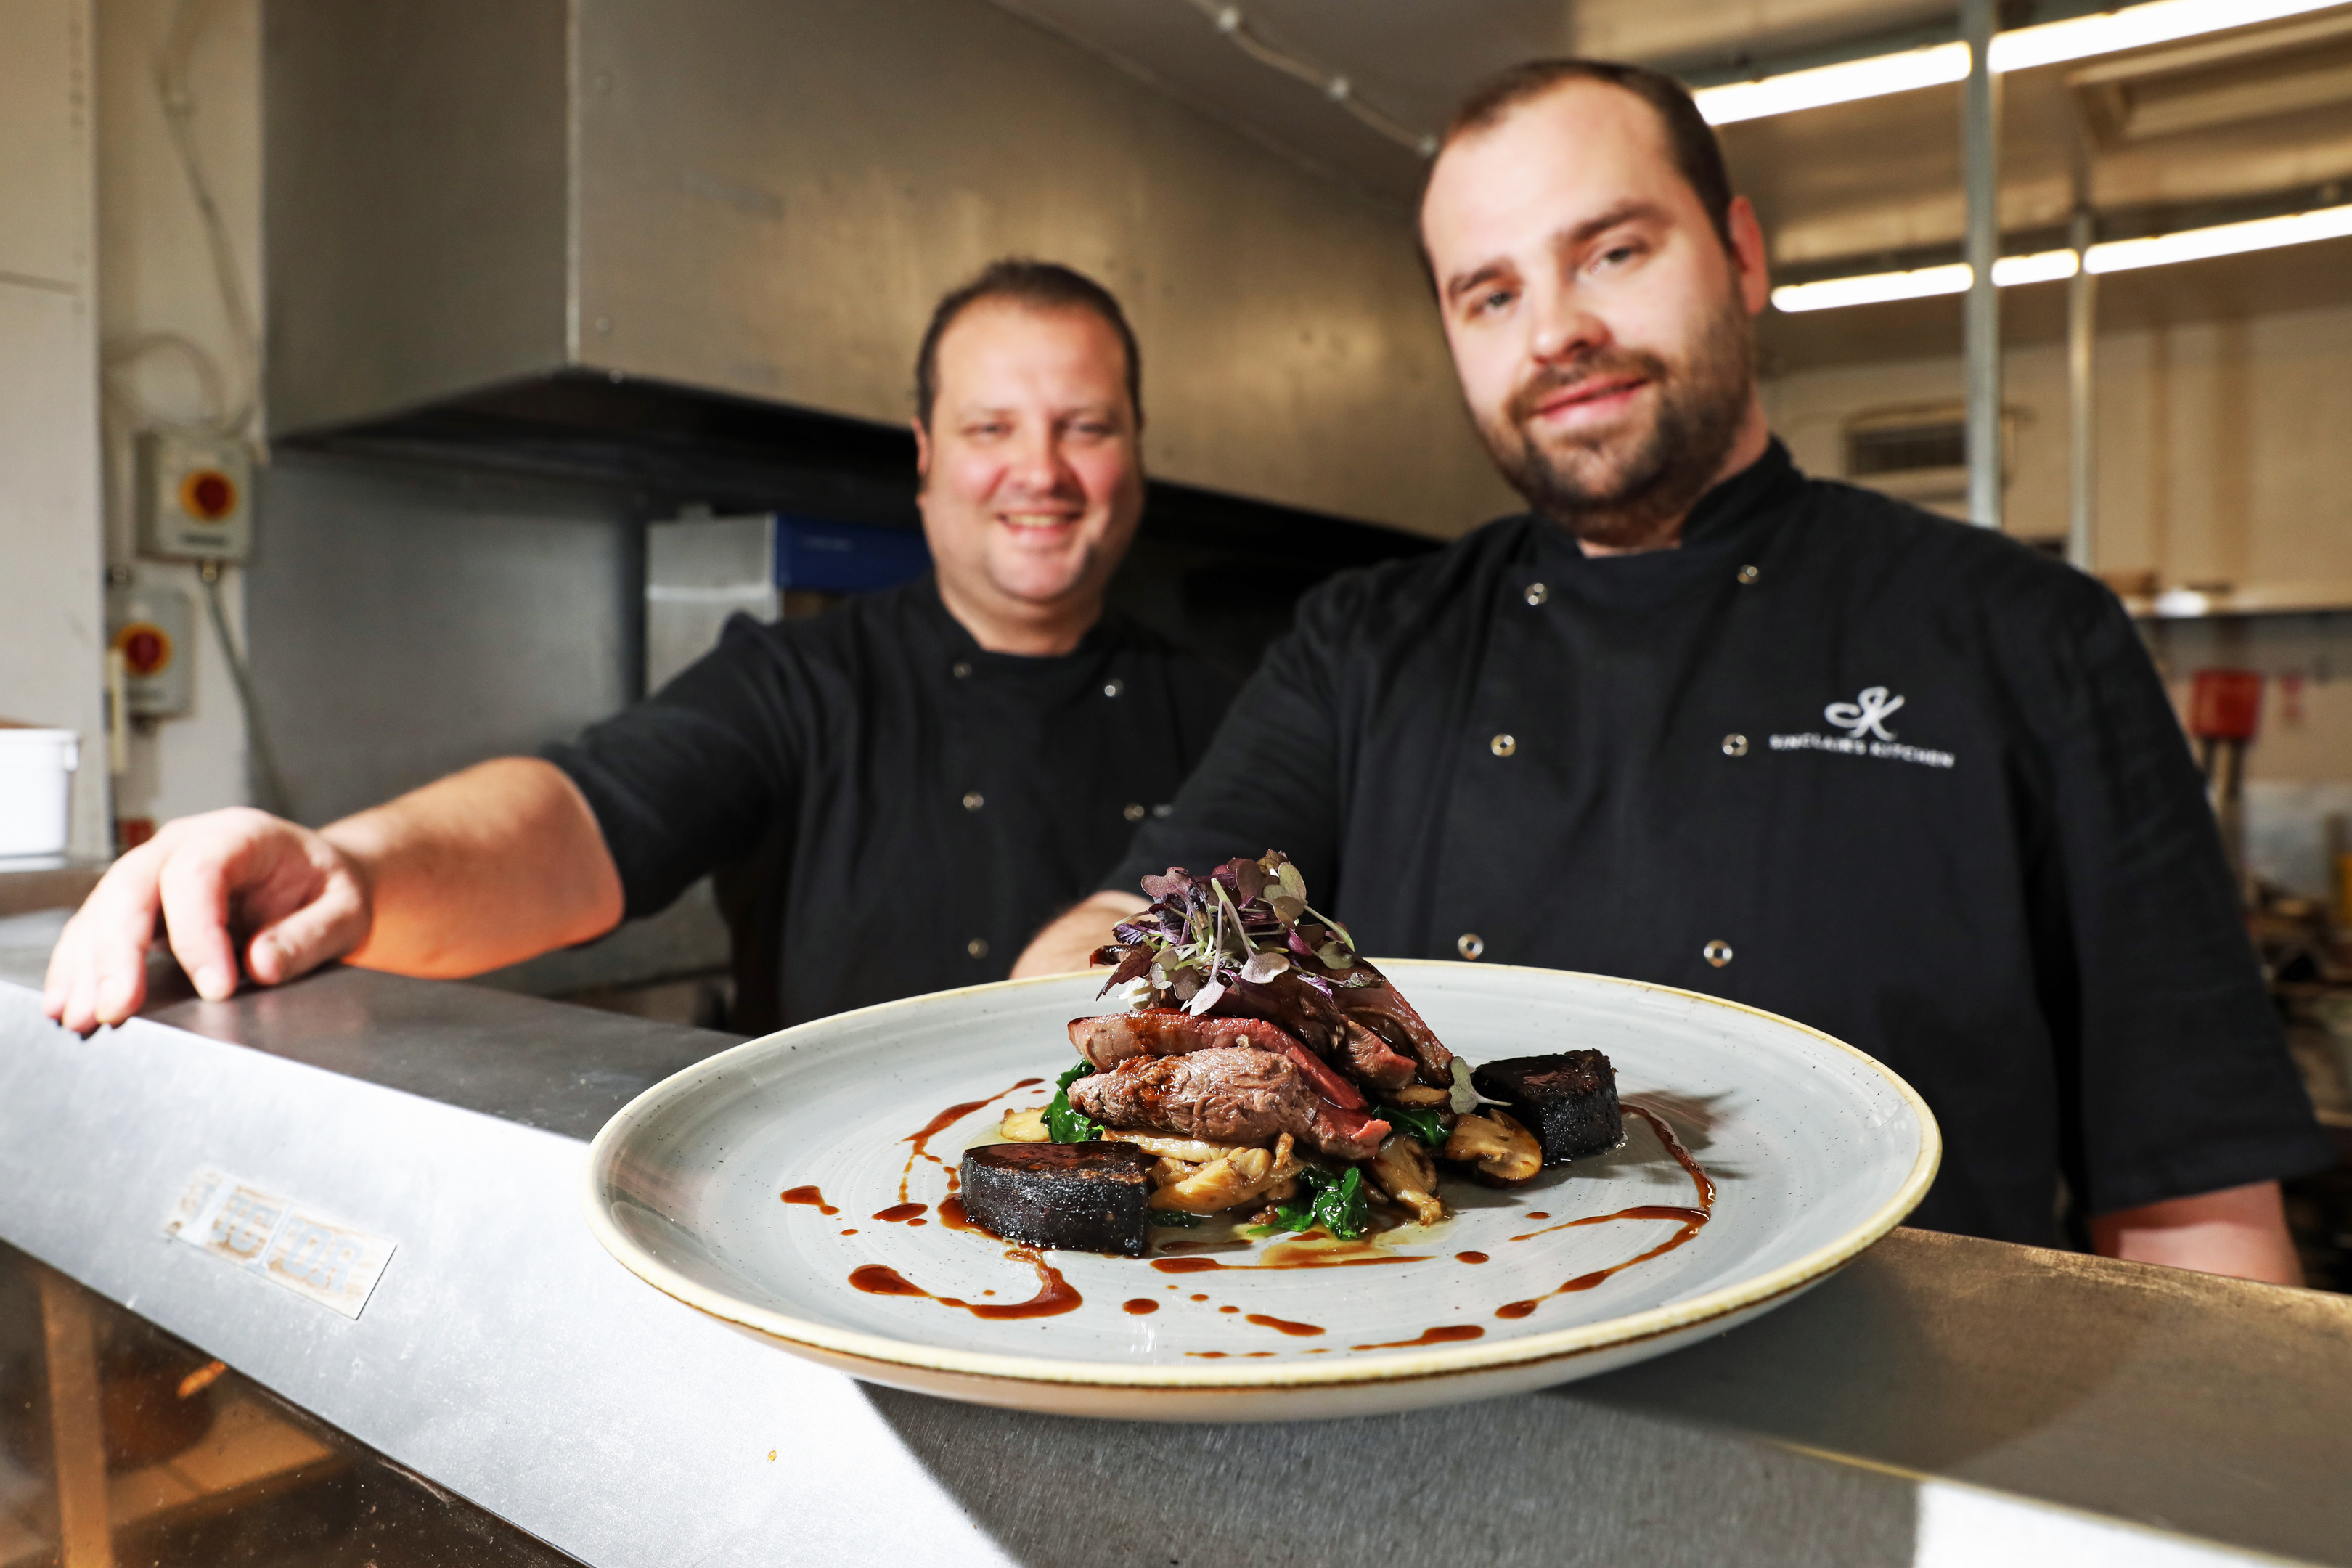 Eden Sinclair and head chef Jordan Sinclair with their dish of wood pigeon, wild mushroom, black pudding and red currant jus.